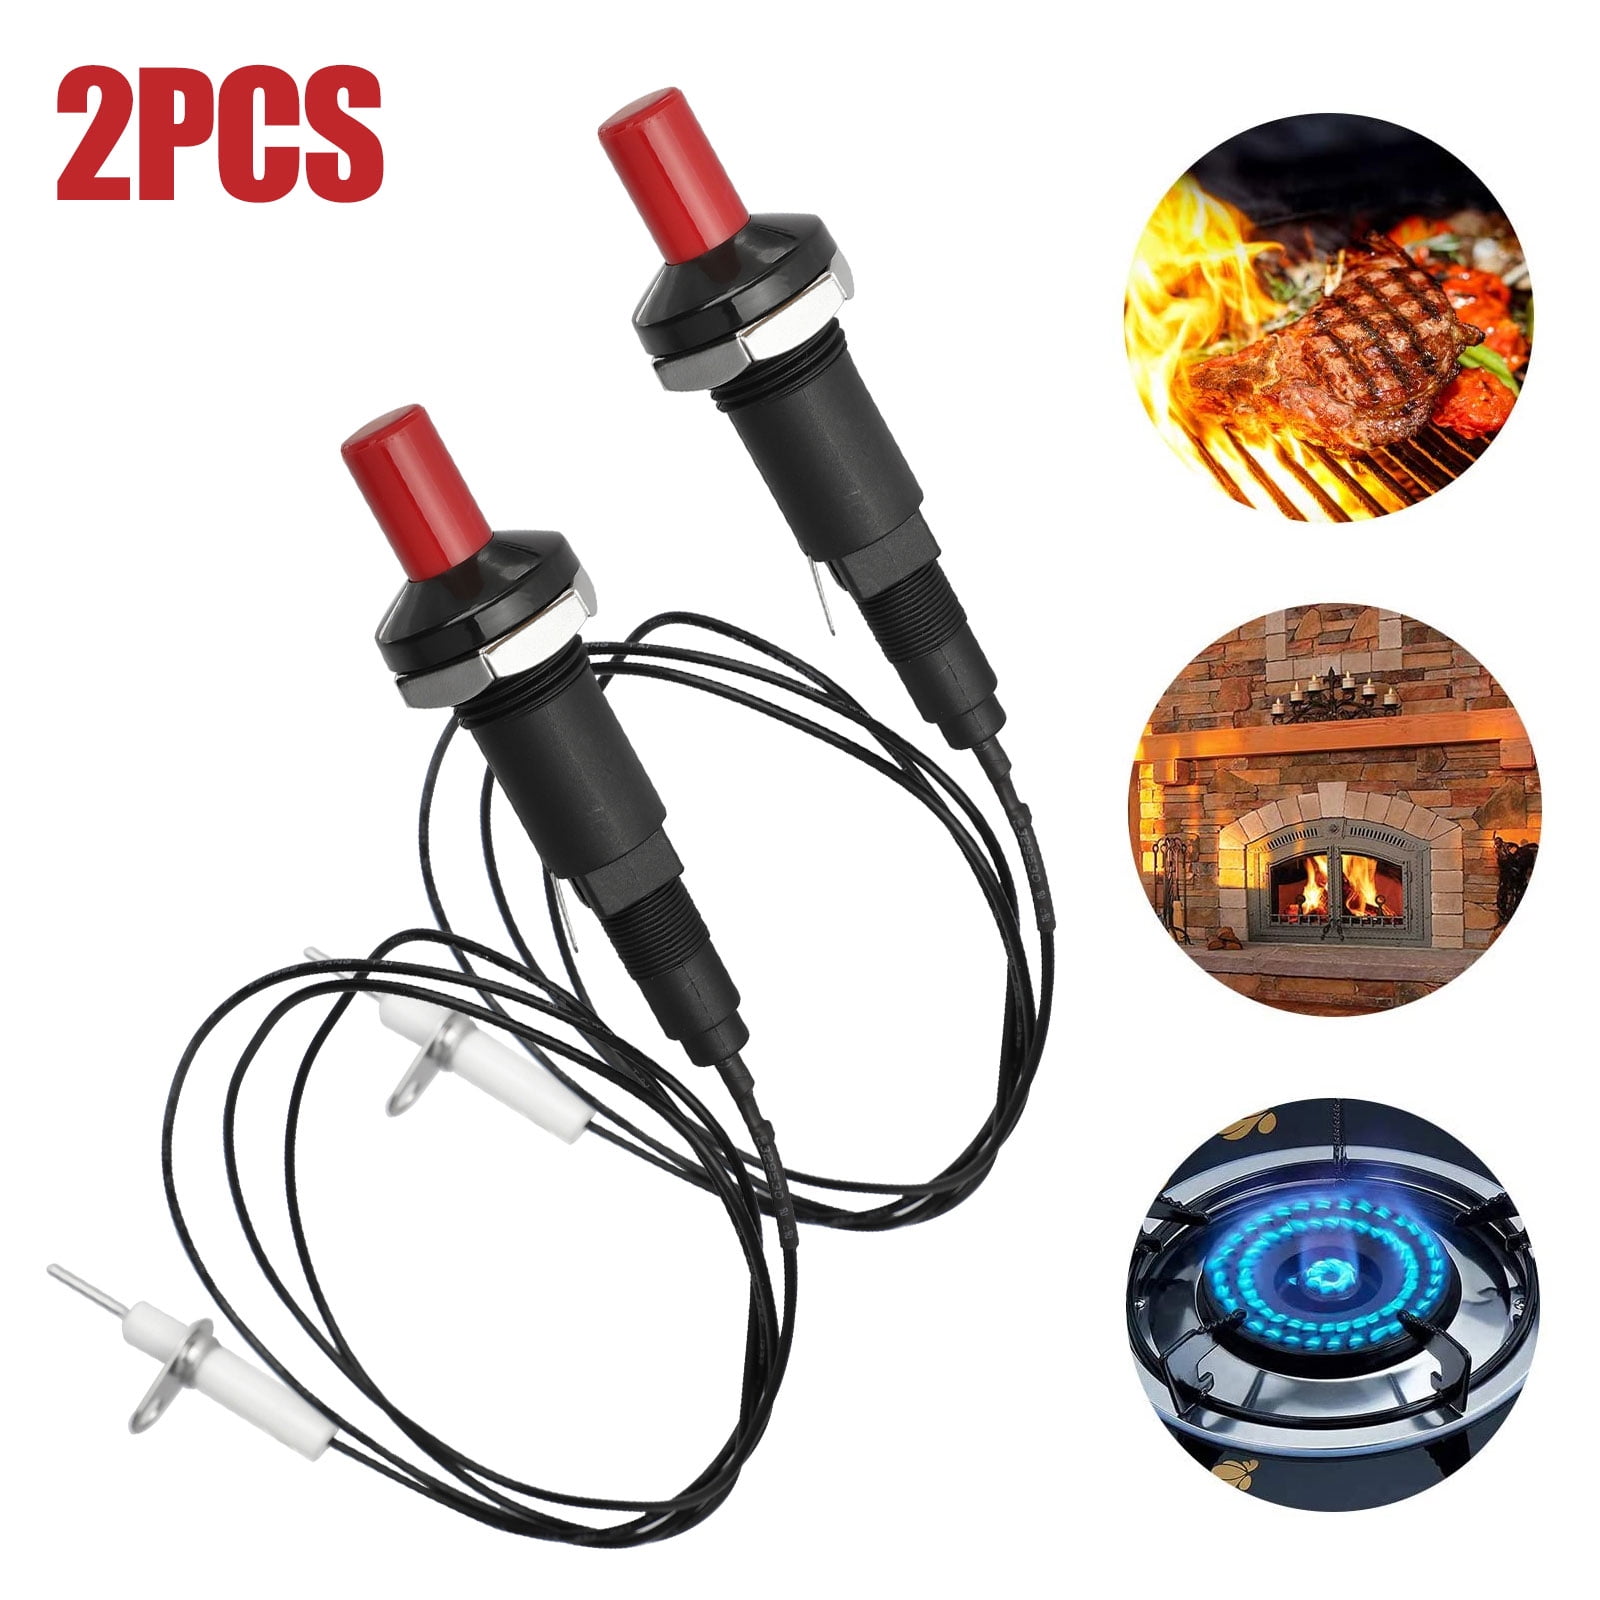 BATTERY POWERED PIEZO ELECTRIC SPARK IGNITOR FITS 18MM HOLE BBQ OVEN FRYER GRILL 